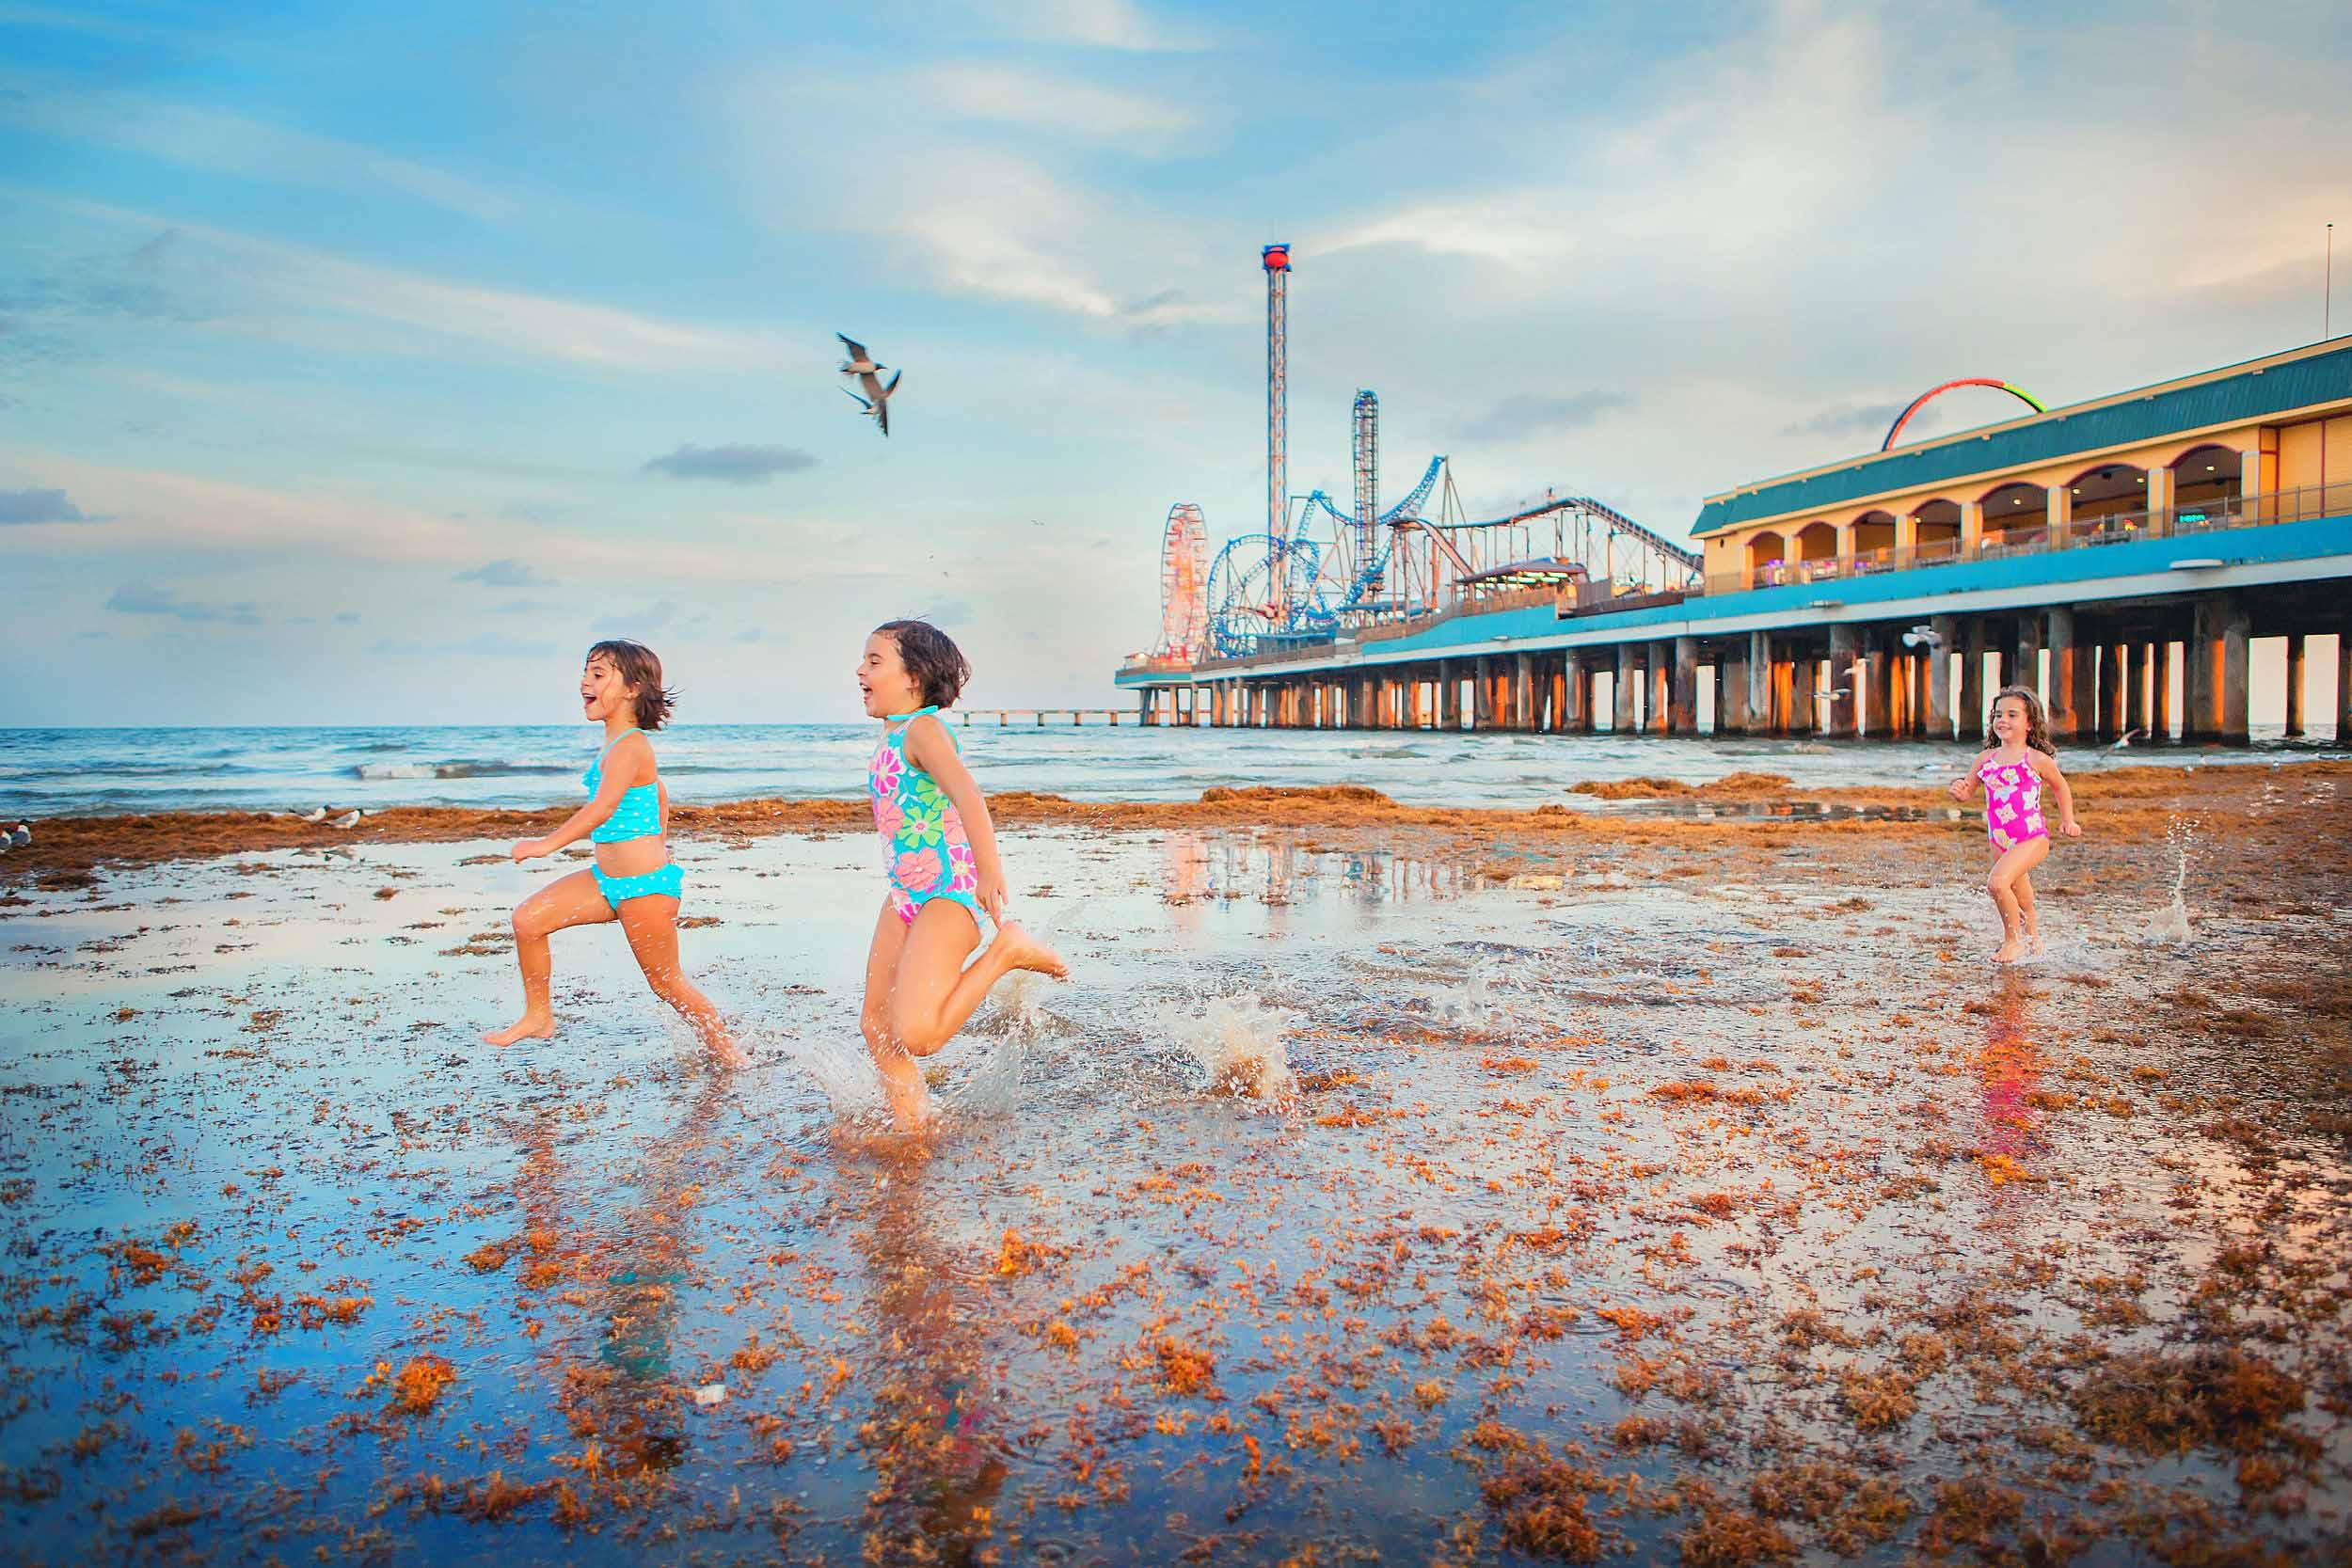  Young girls running on beach in Galveston Texas by Pleasure Pier by family photographer spryART photography 